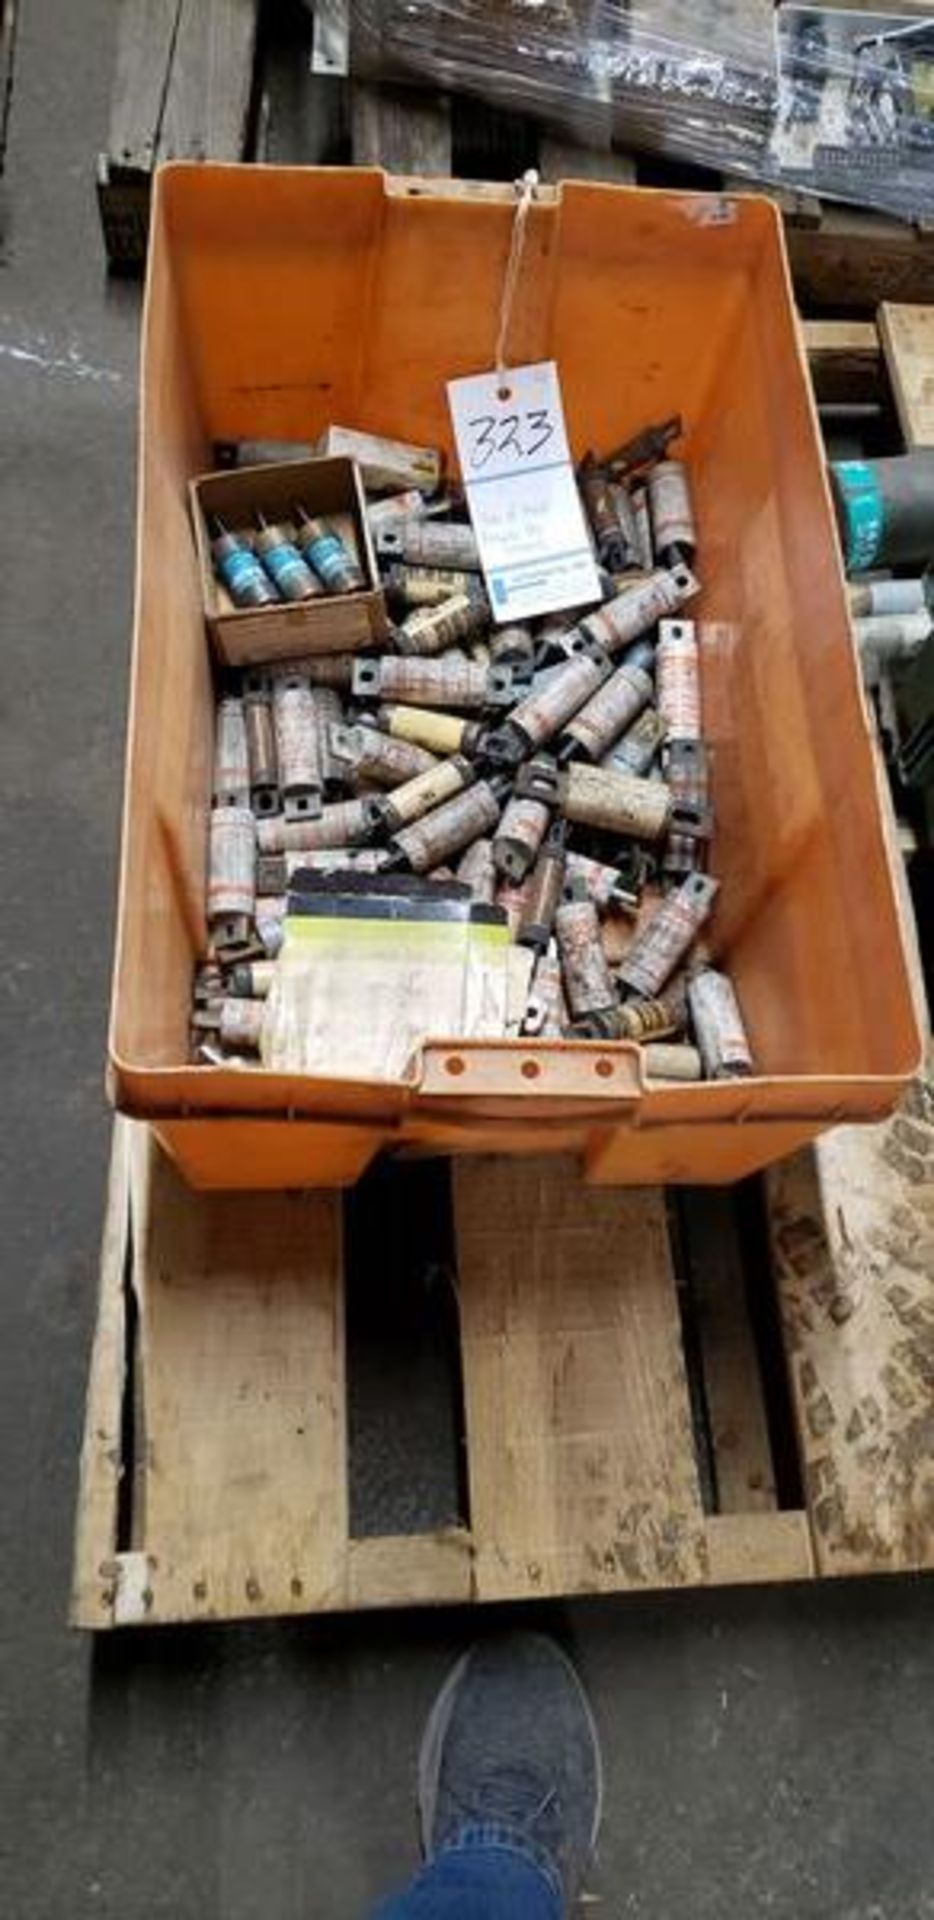 TUB OF ASSORTED FUSES AS SHOWN